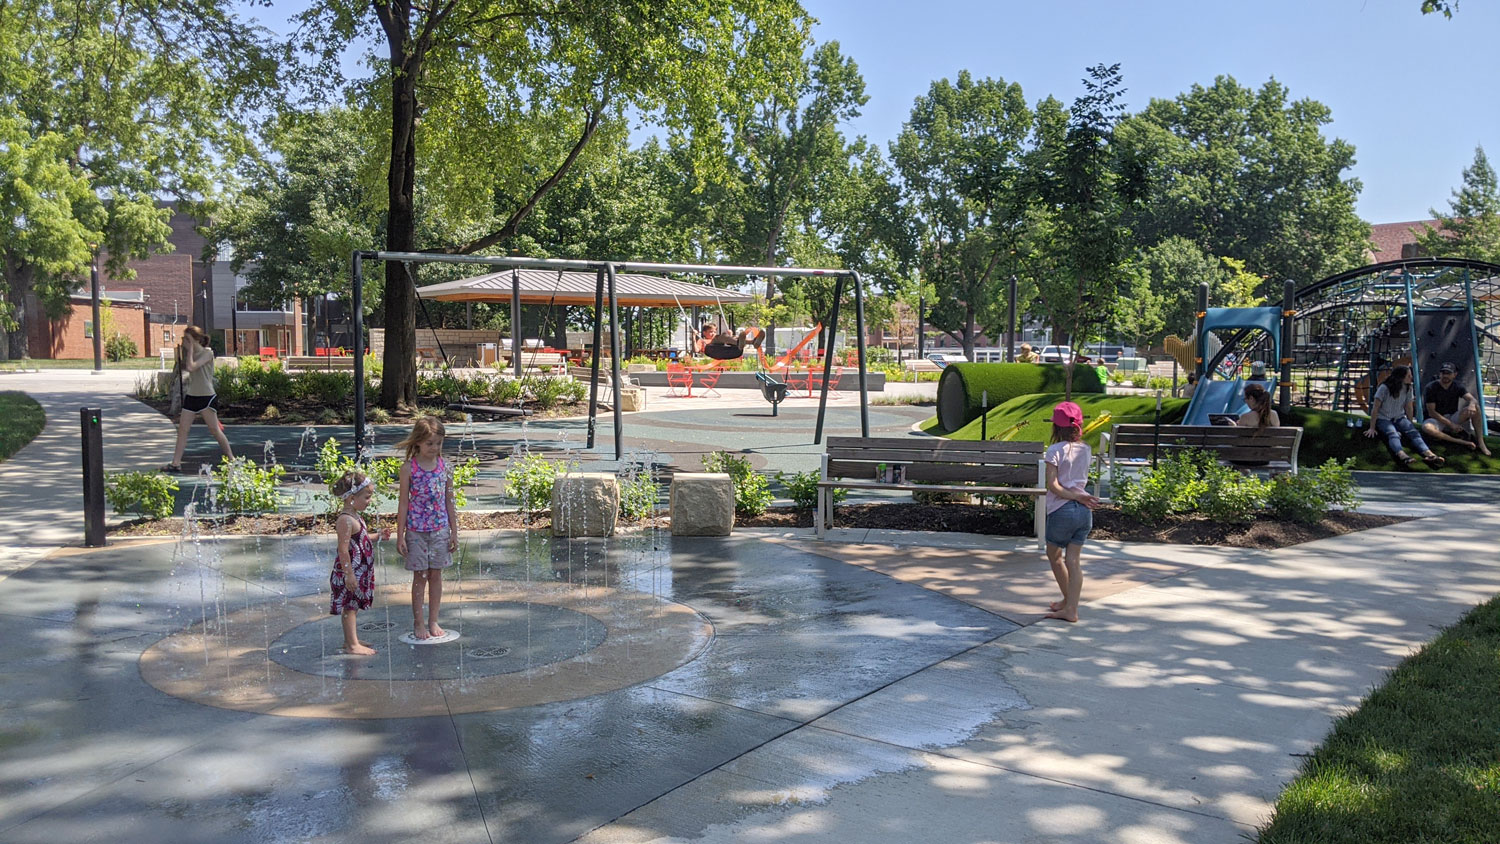 This is an image of downtown overland park thompson splash pad playground web